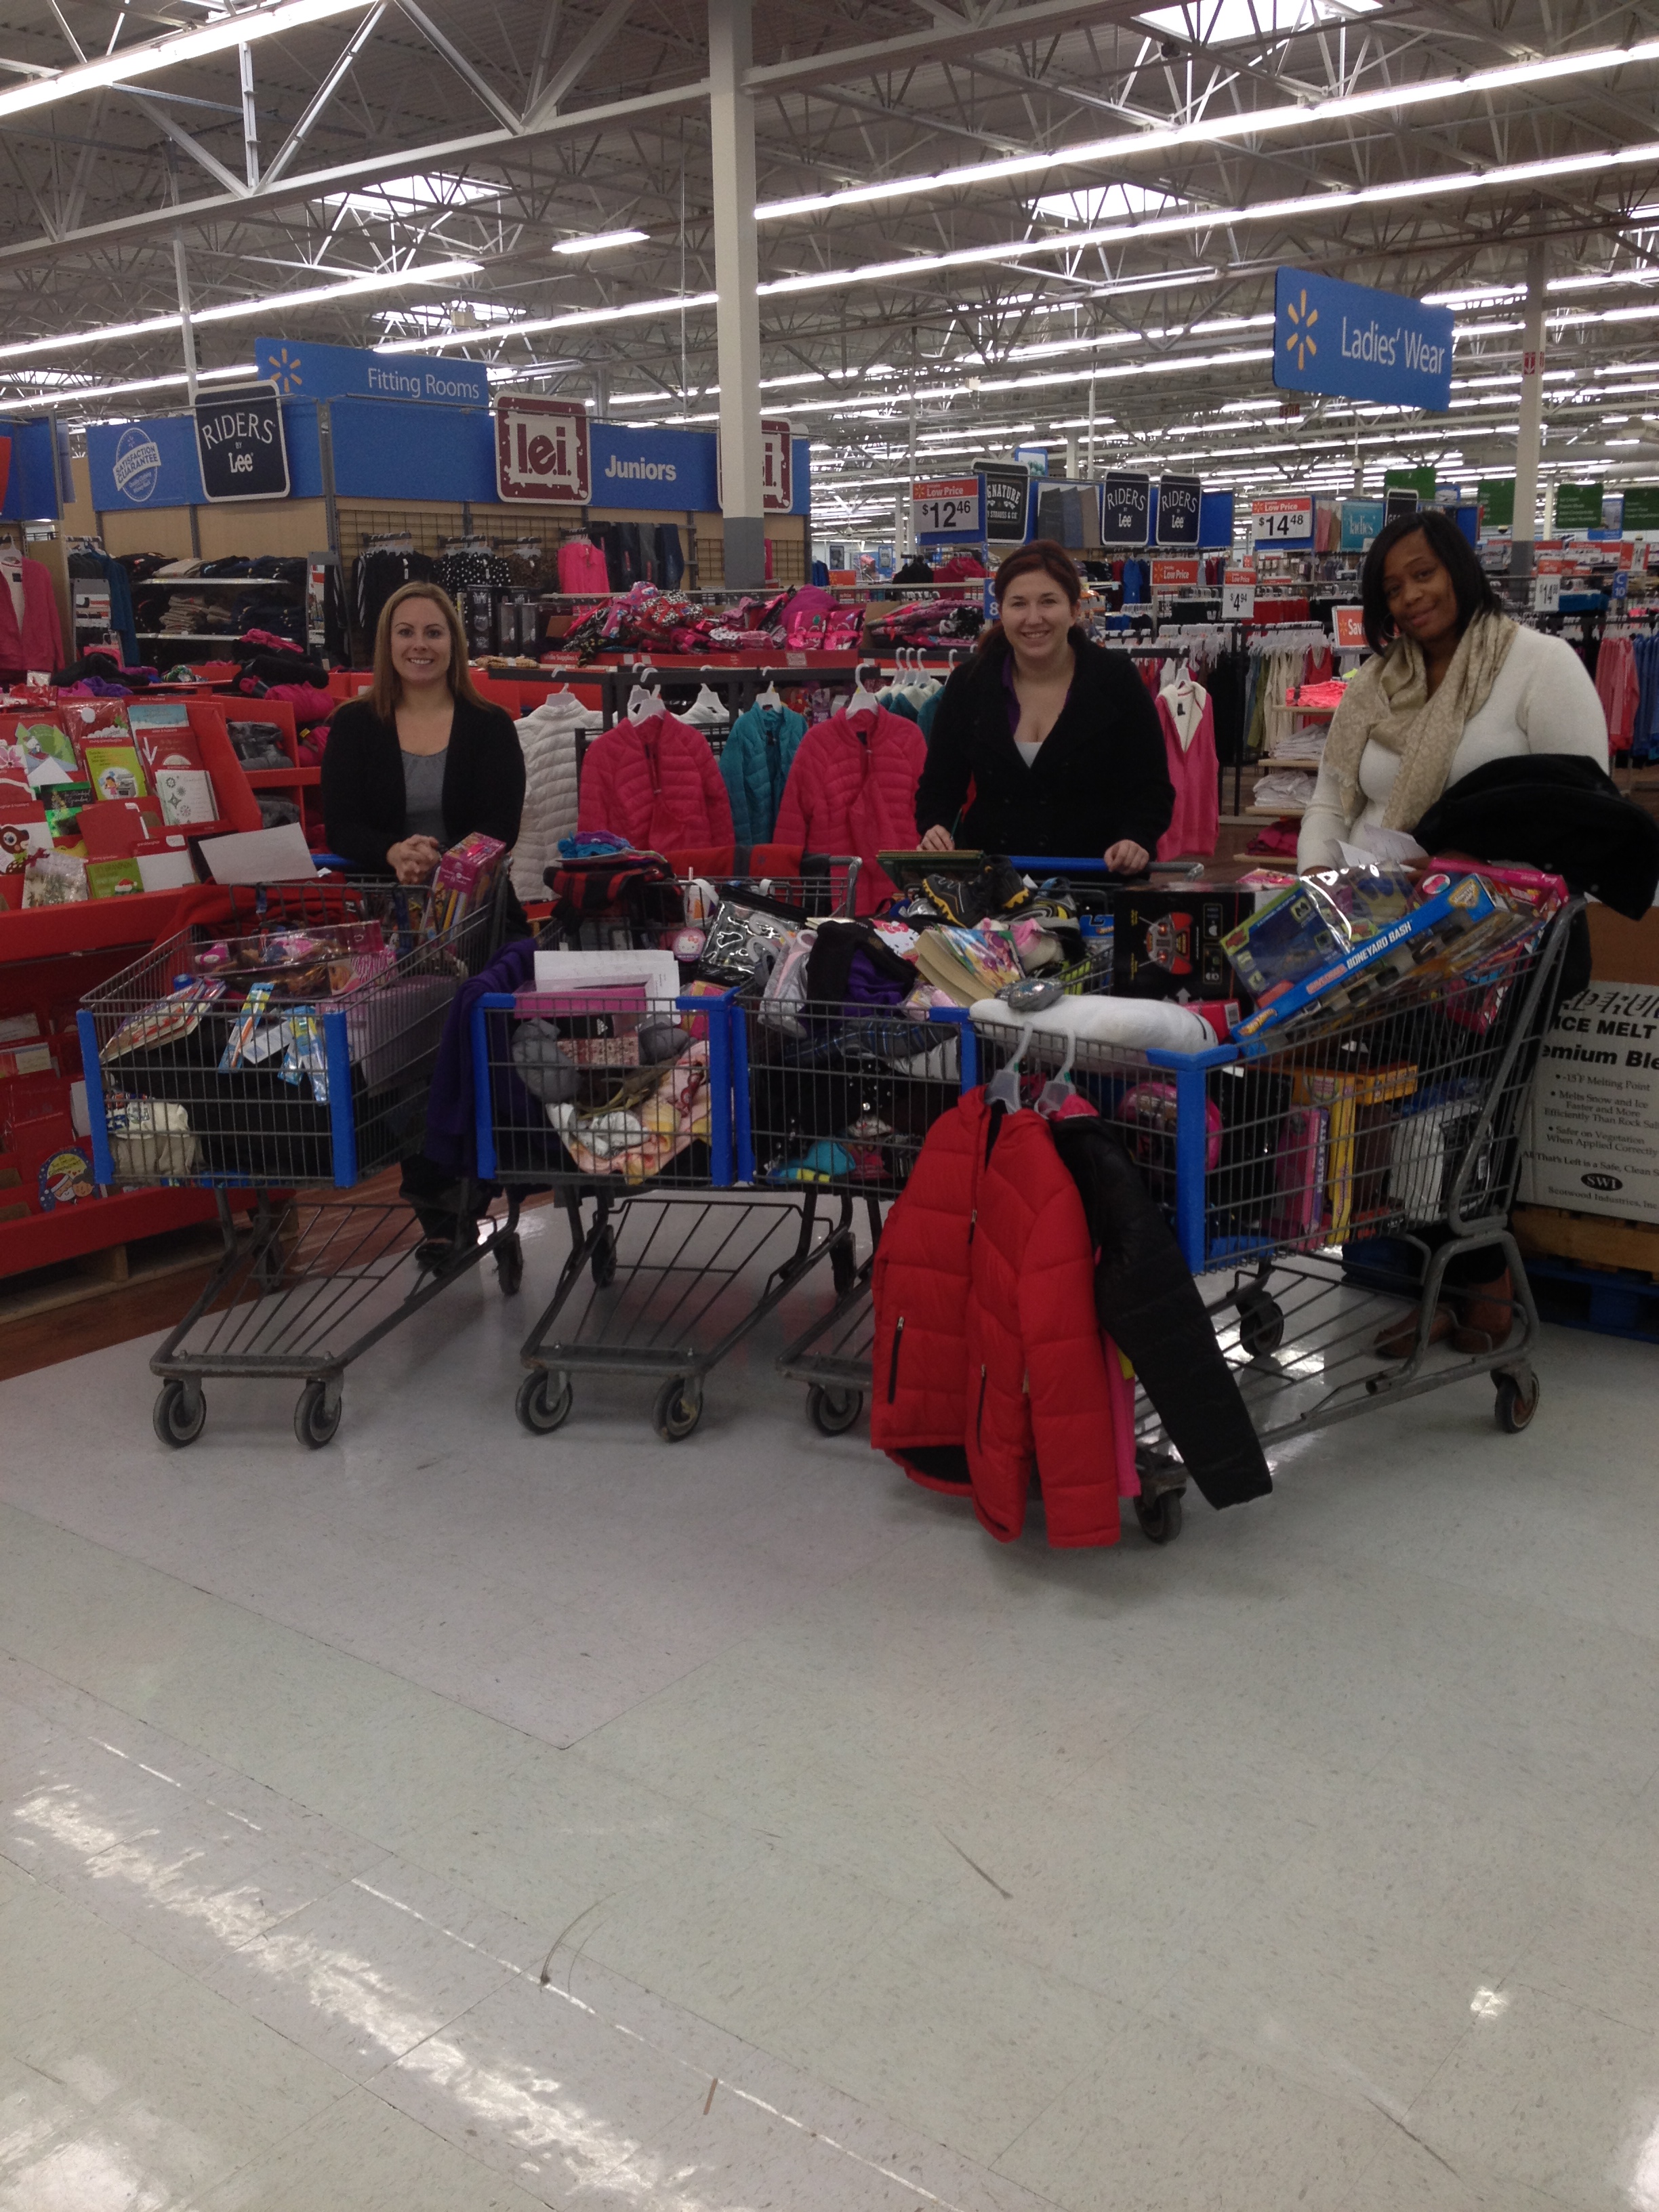  Department of Anesthesiology staff shop at Walmartfor the family adopted through Family Connections and for the veterans at McVet.